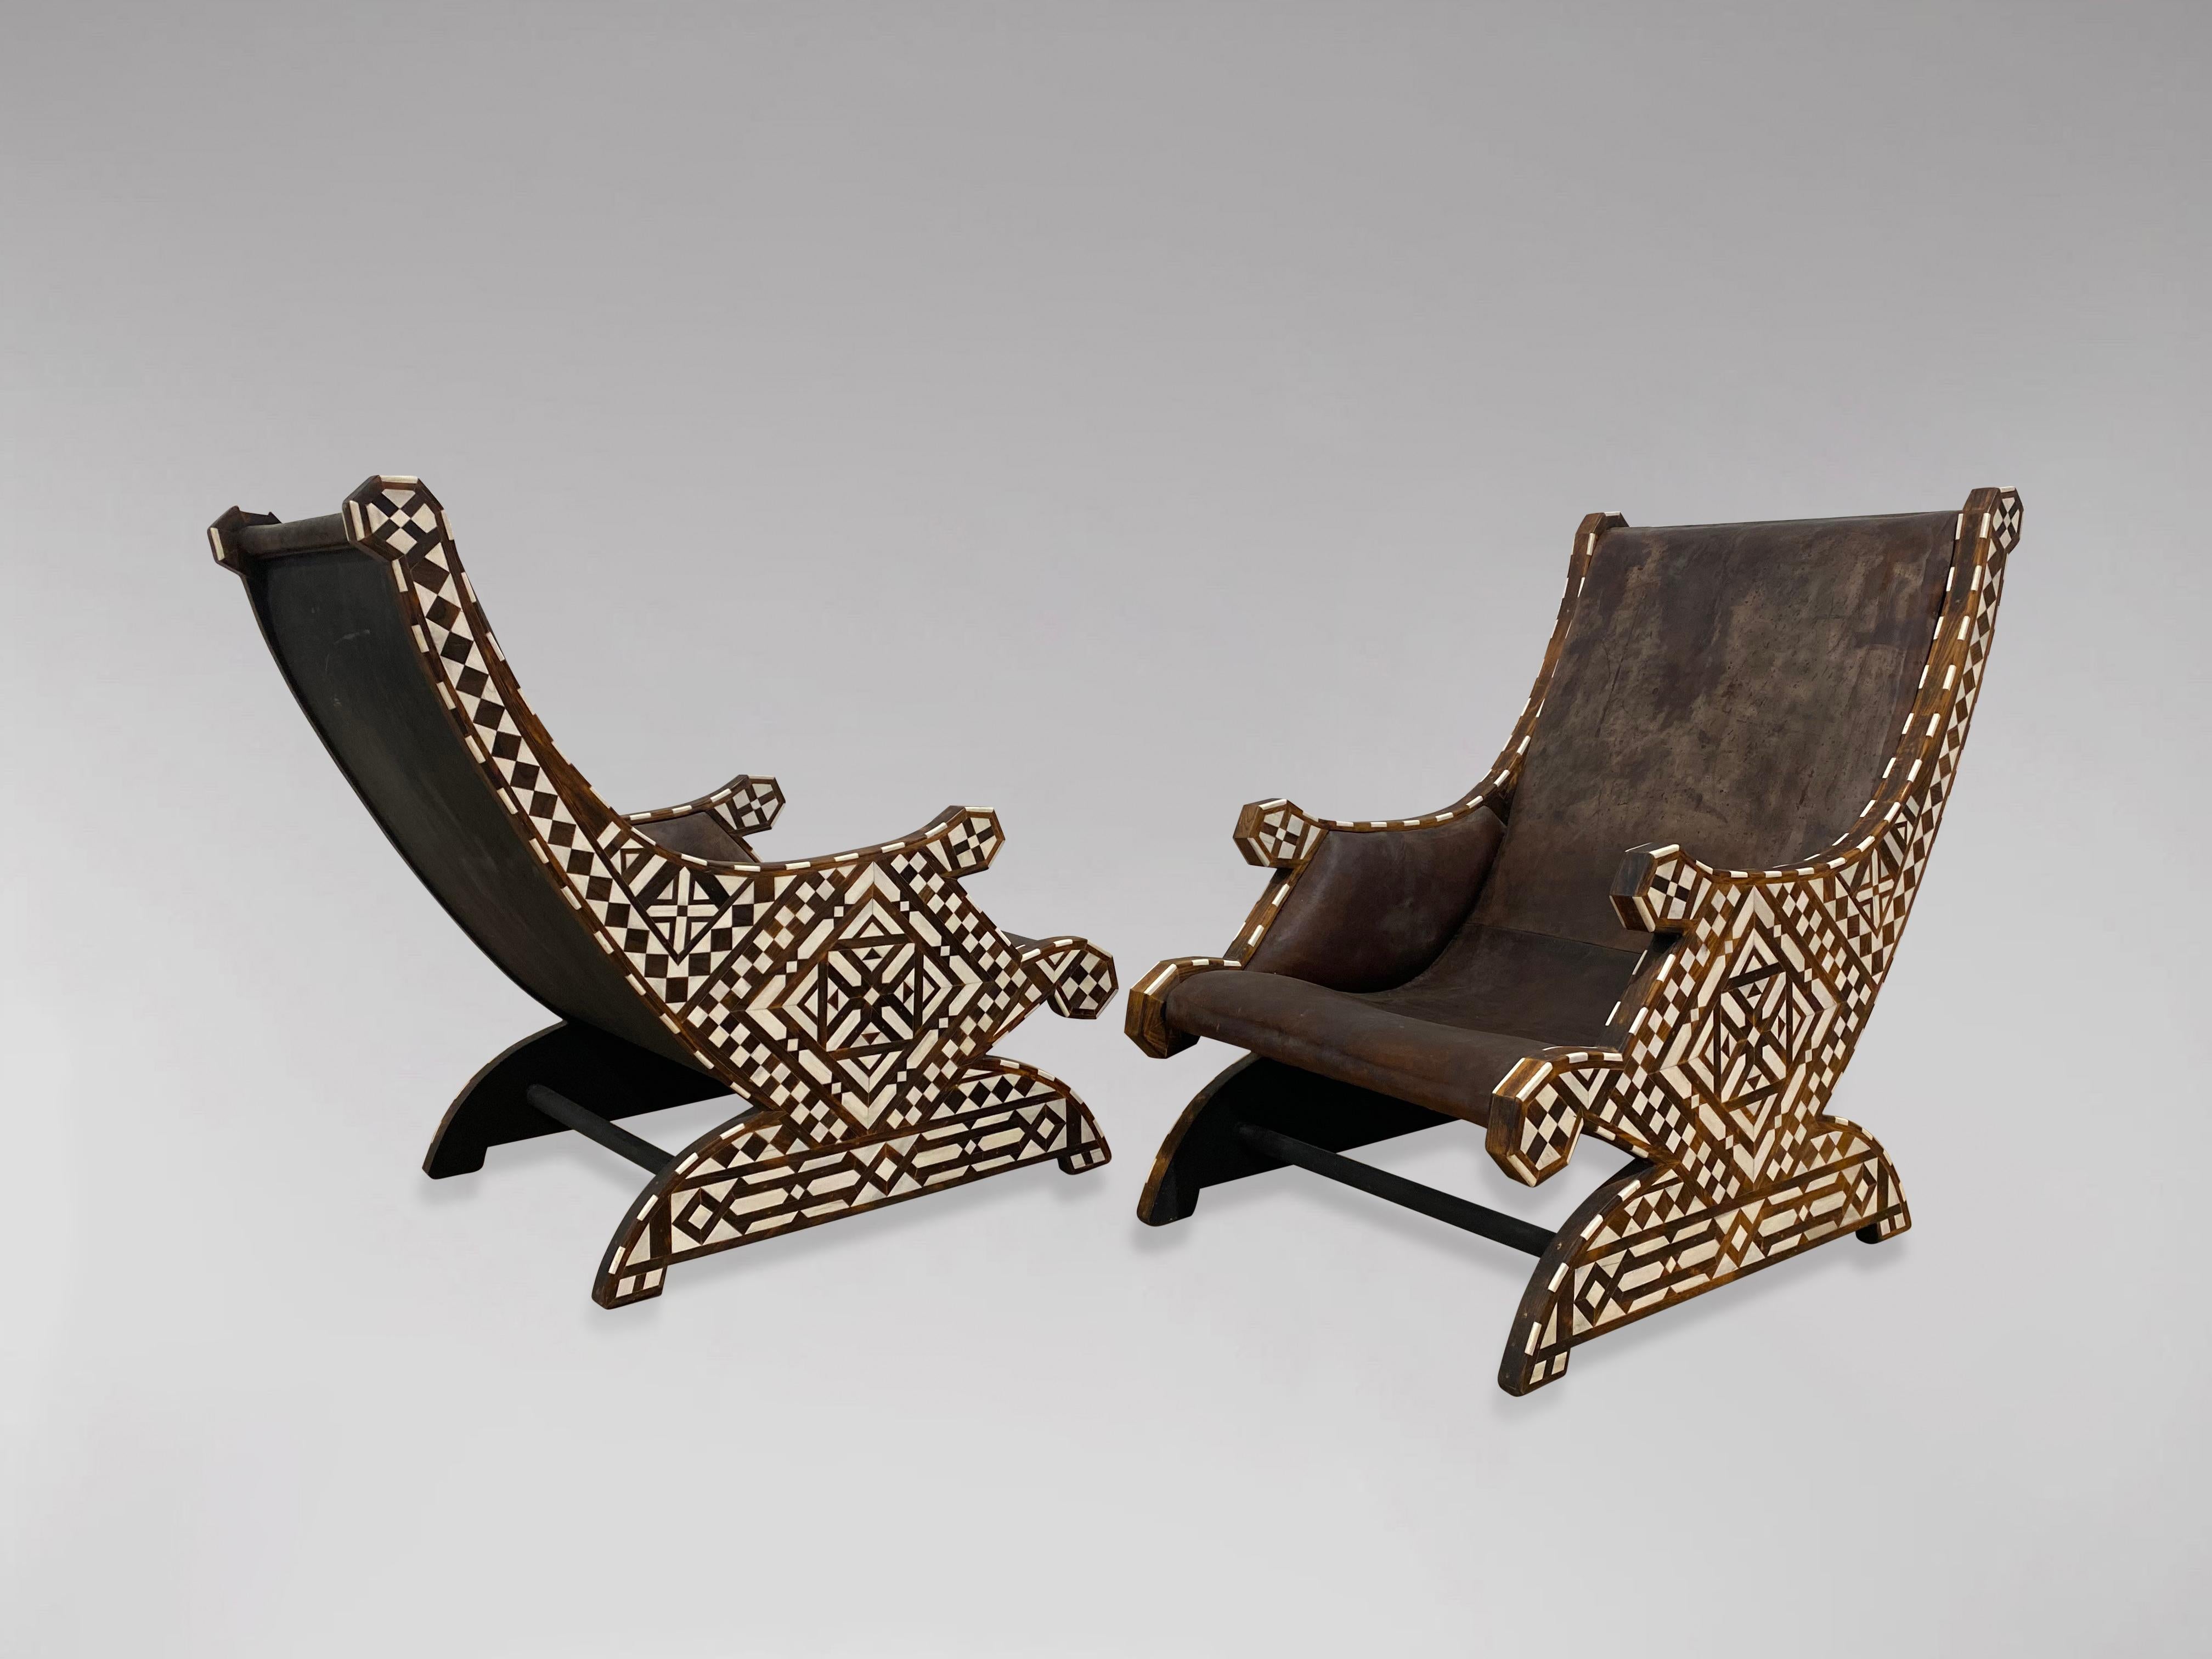 A rare pair of 19th century British Colonial solid rosewood lounge armchairs with bone inlaid designs patterns throughout, with allover geometrical bone inlay. The frame banded with rosewood and bone, side arm panels comprising two lovely shaped arm